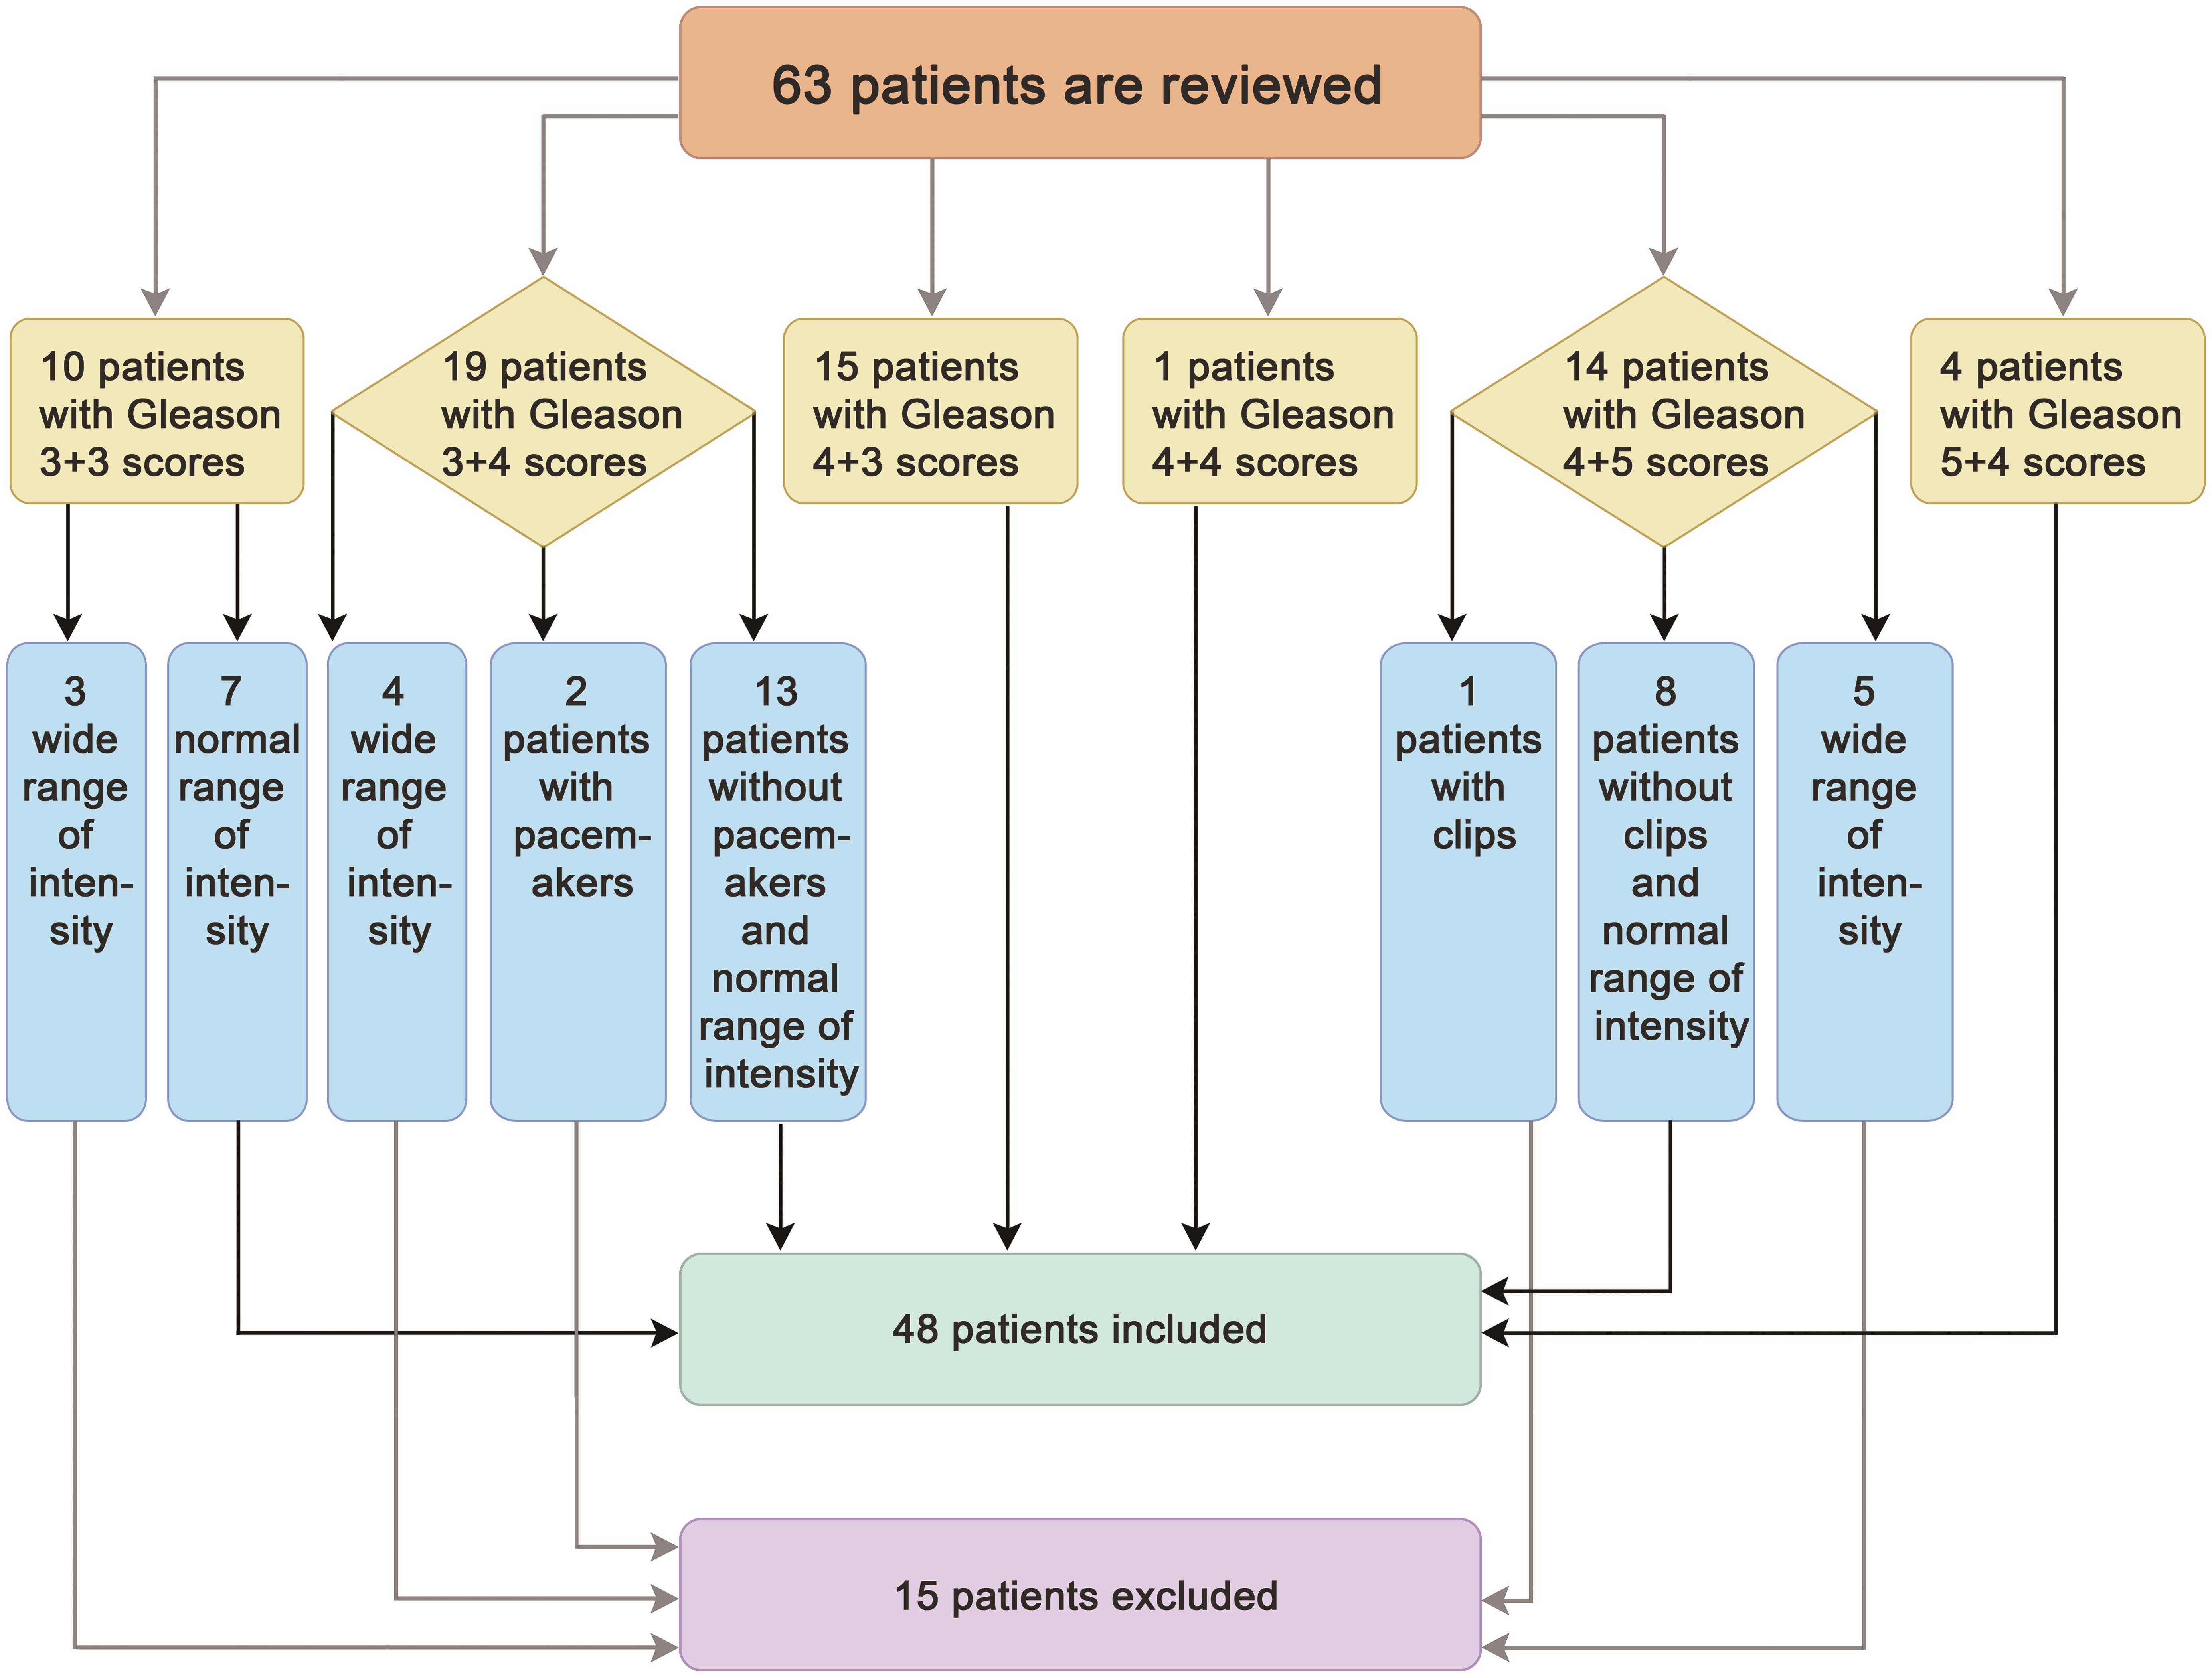 The flow chart of patient’s inclusion and exclusion.